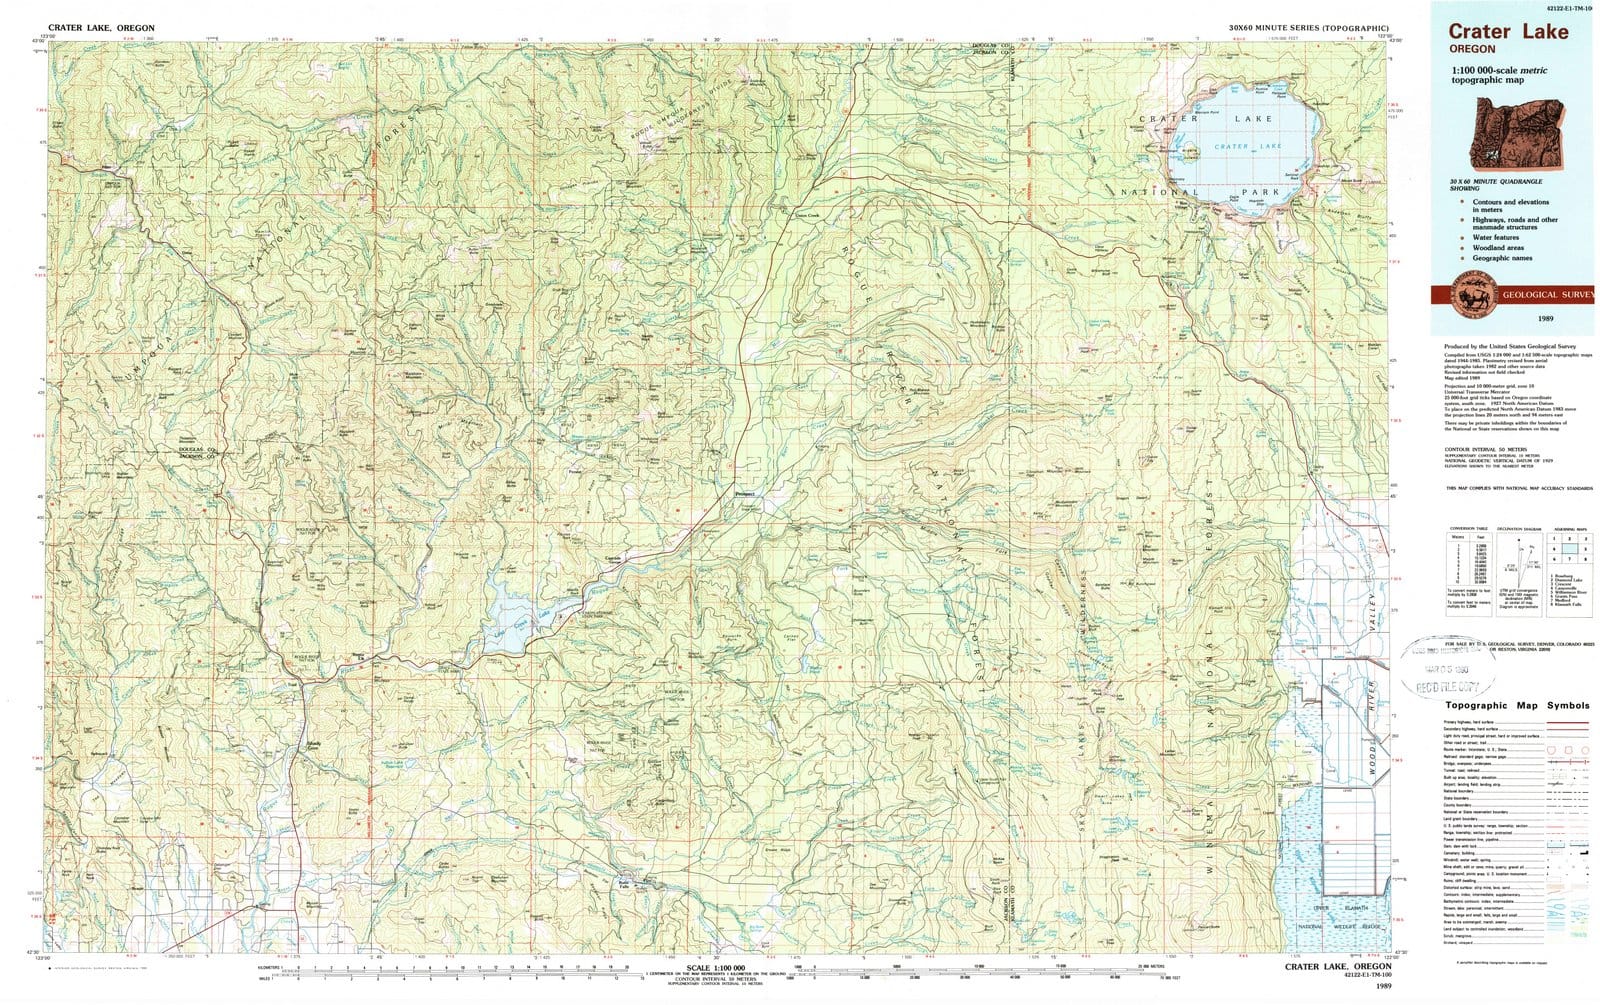 1989 Crater Lake, OR - Oregon - USGS Topographic Map